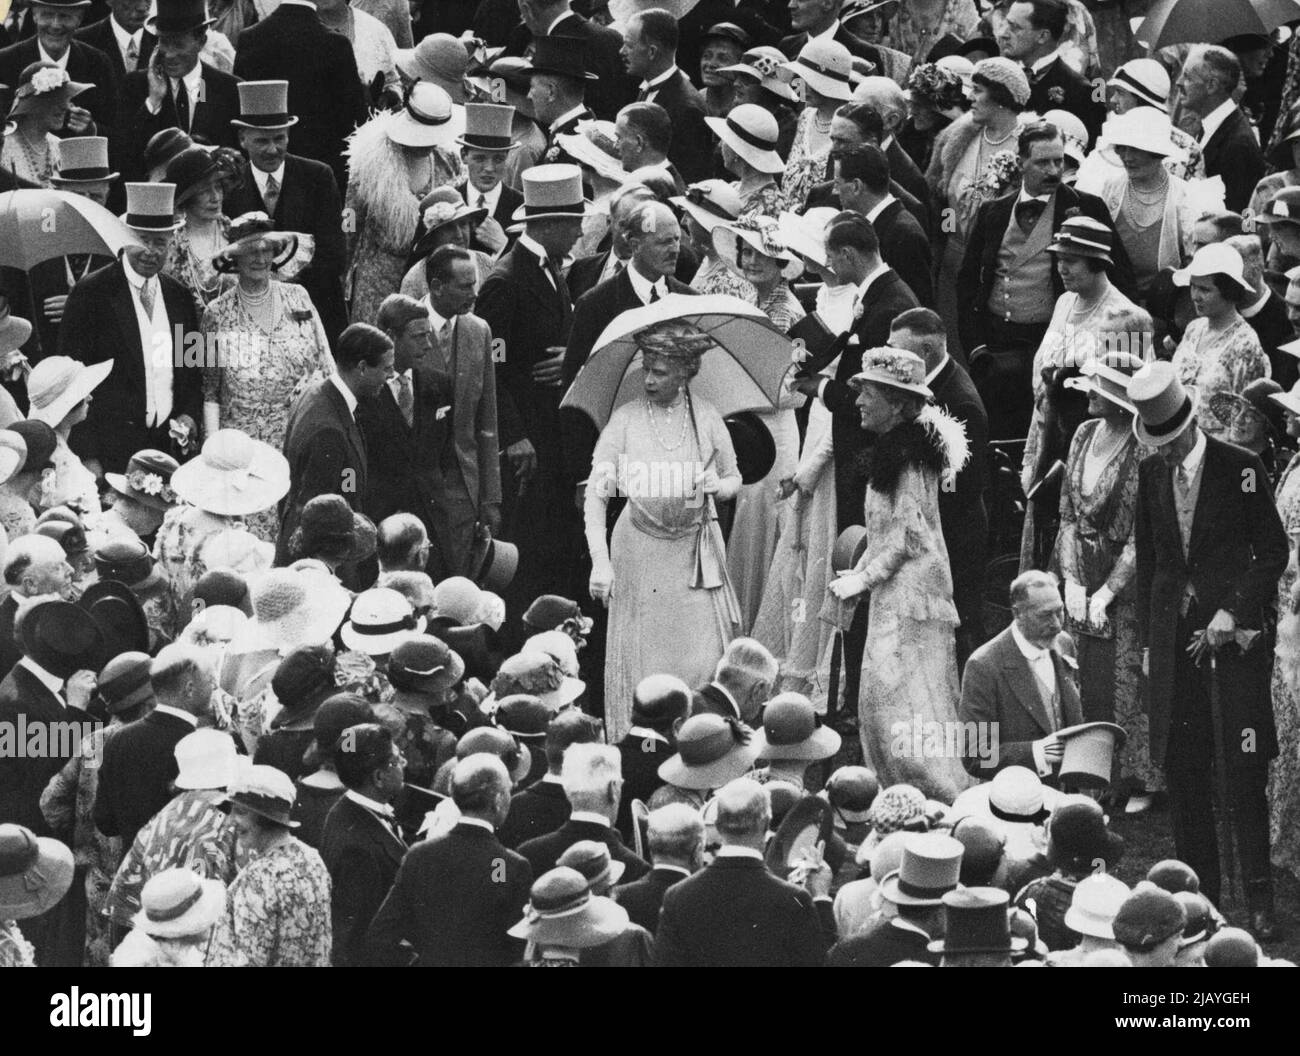 The Royal Garden Party -- Their Majesties the King and Queen gave a garden party at Buckingham Palace today, July 20th., for which more than 6000 invitations had been sent out. A general view showing T.M. The King and Queen among their guests. On the right of the Queen may be seen The Prince of Wales, the Duke of Gloucester and Prince George. August 28, 1933. (Photo by Sport & General Press Agency, Limited). Stock Photo